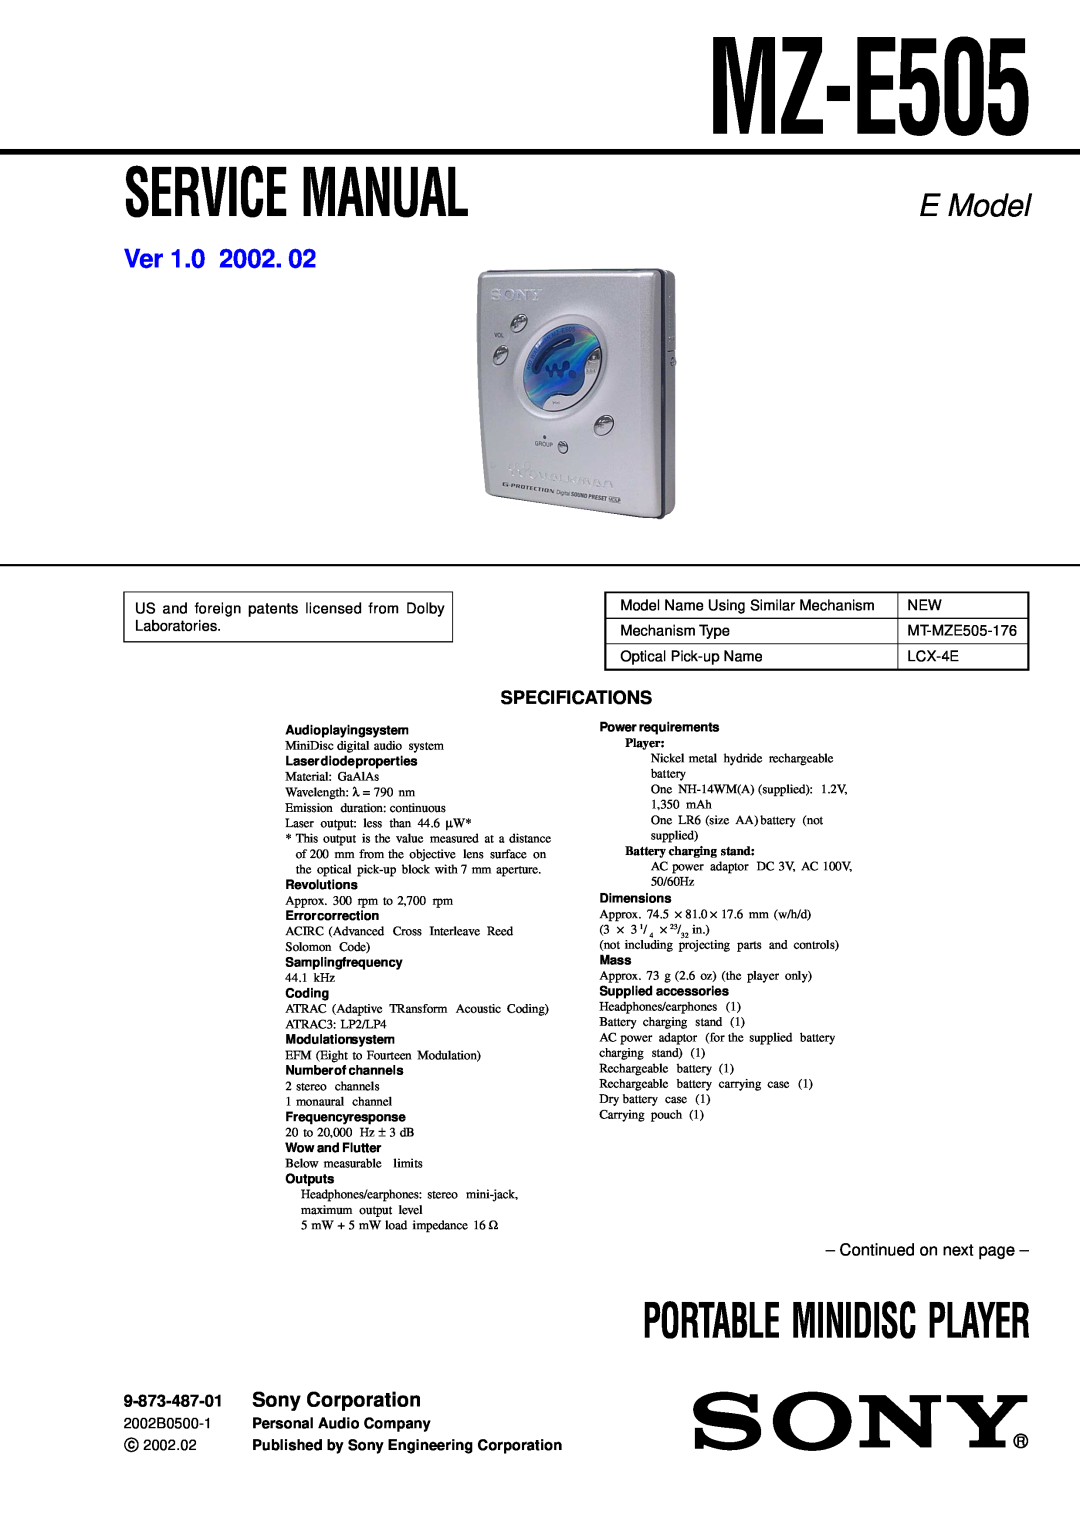 Sony MZ-E505 service manual Sony Corporation, Specifications, Continued on next page, Portable Minidisc Player, E Model 